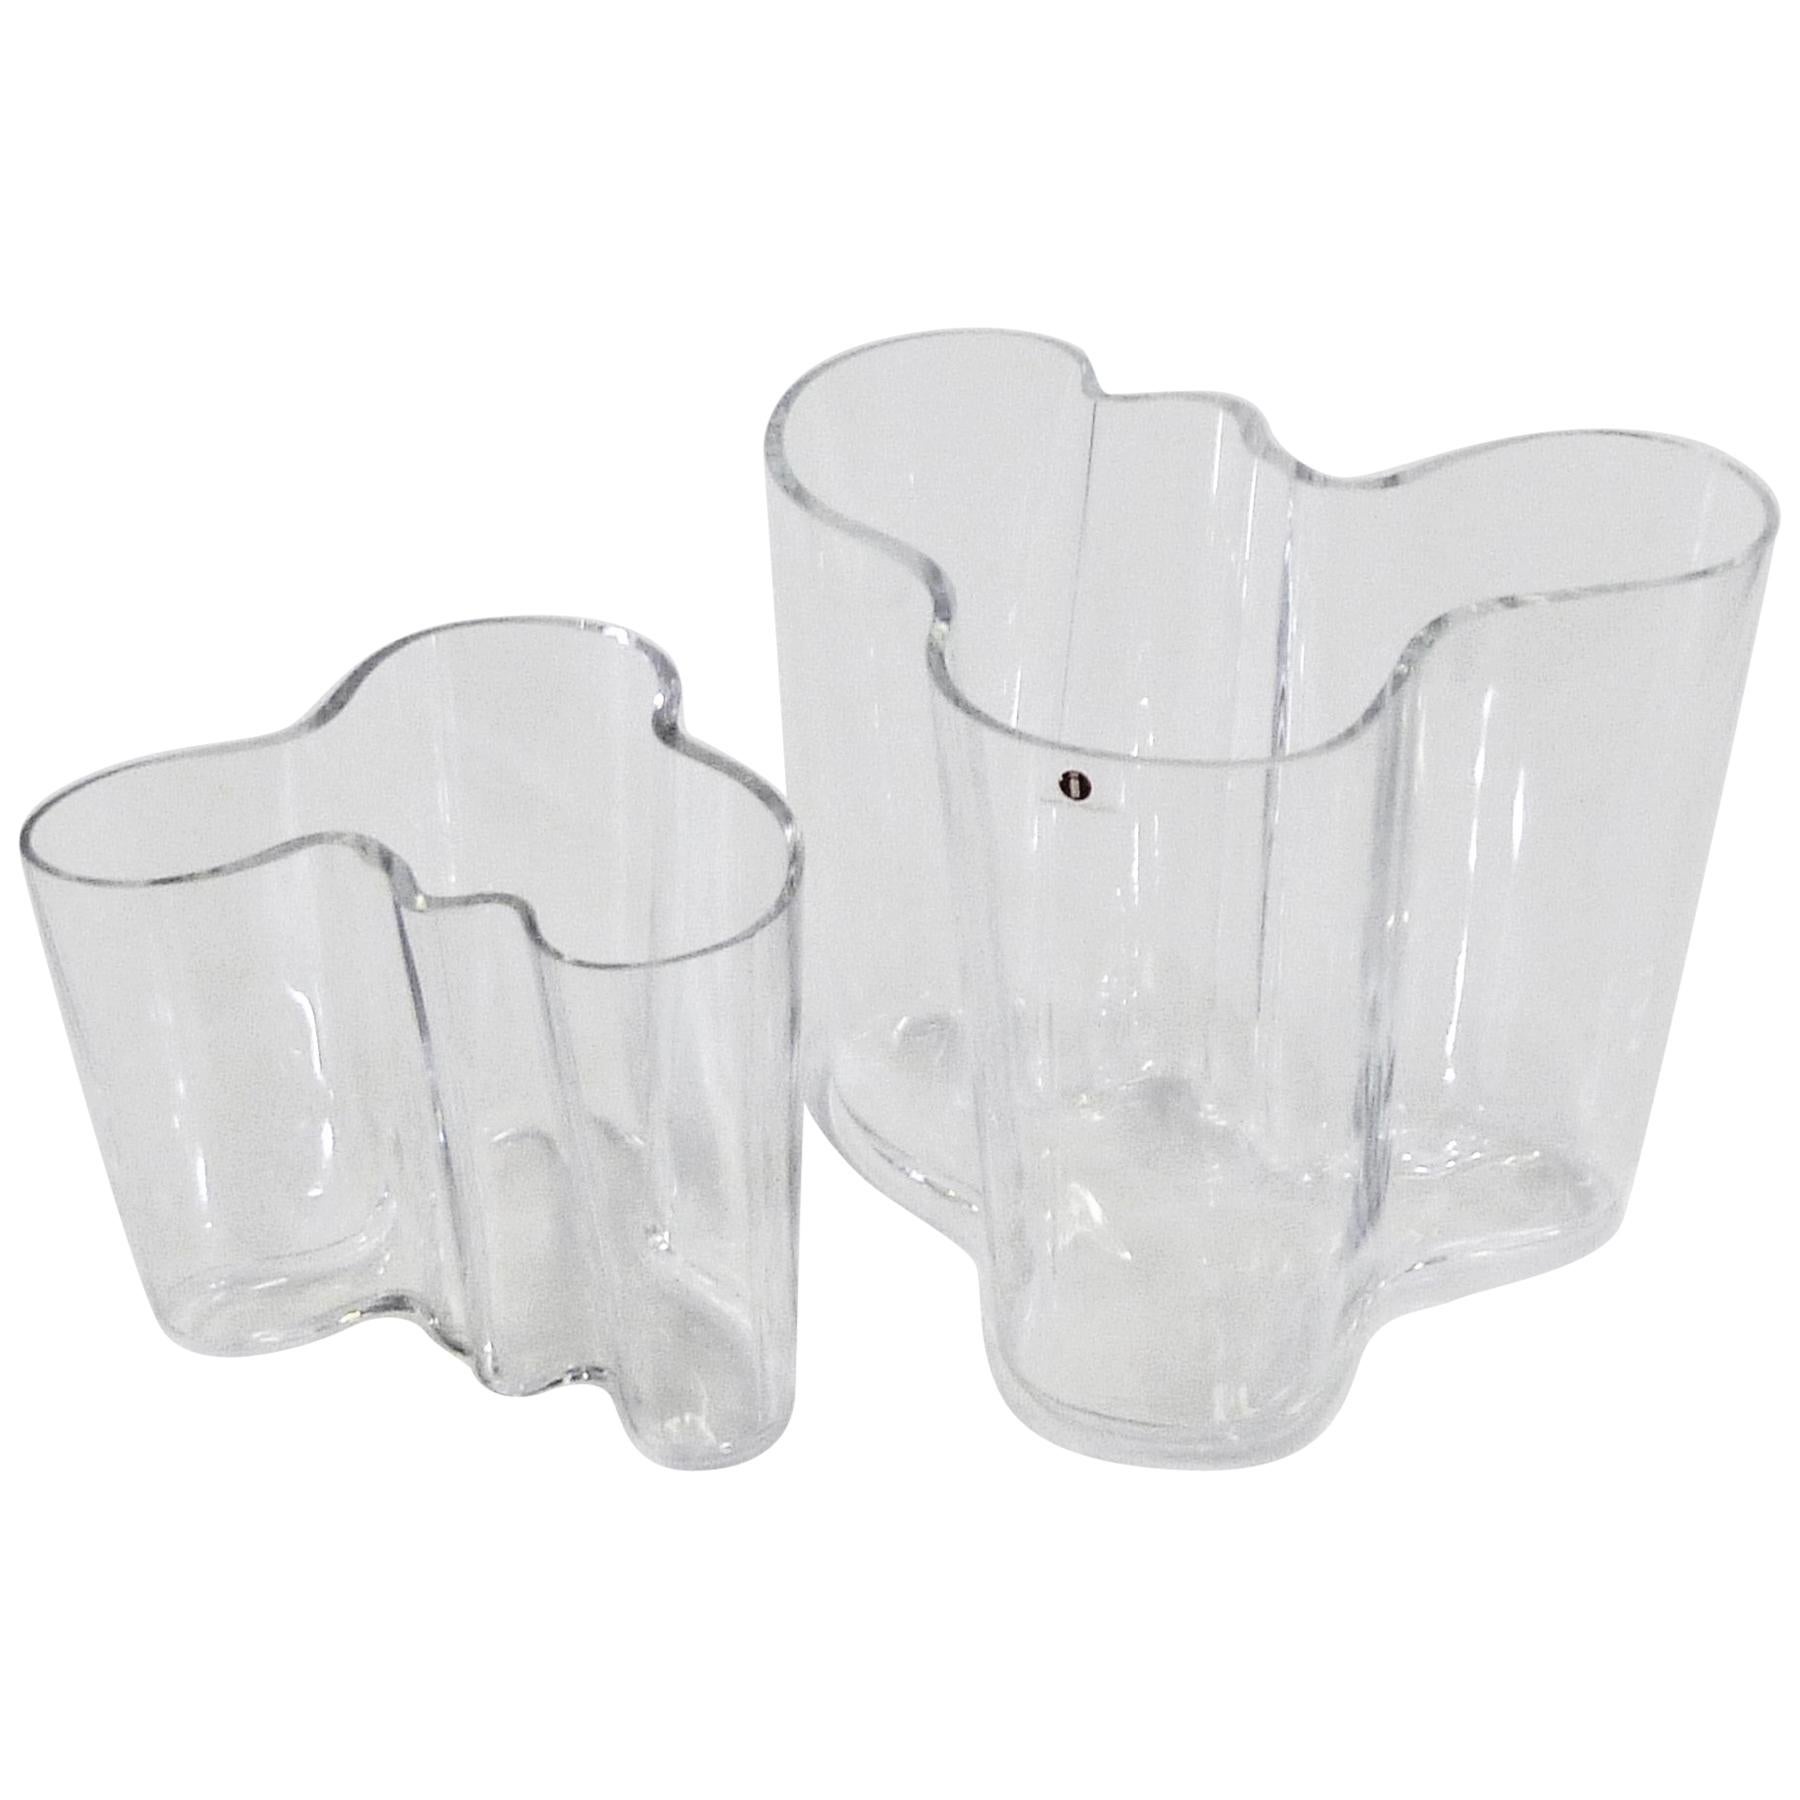 Two Clear Savoy Vases by Alvar Aalto for Iittala, Finland, 1970s